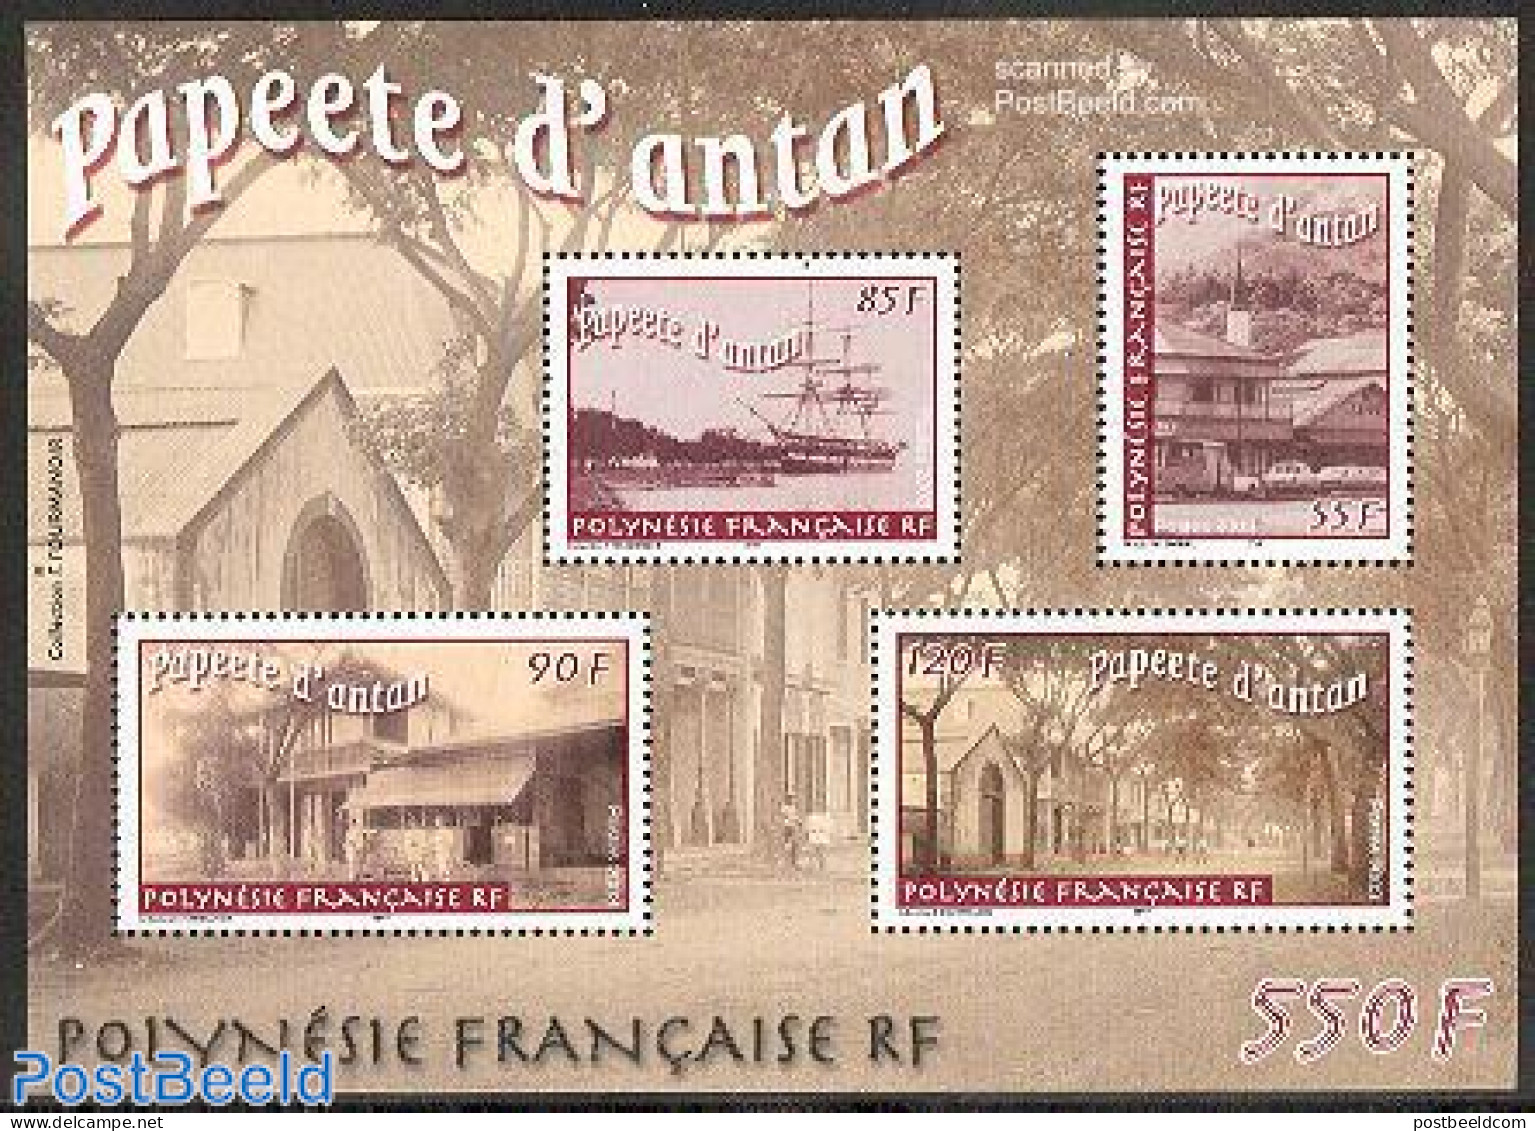 French Polynesia 2003 Papeete In The Past S/s, Mint NH, Sport - Transport - Cycling - Automobiles - Ships And Boats - Neufs